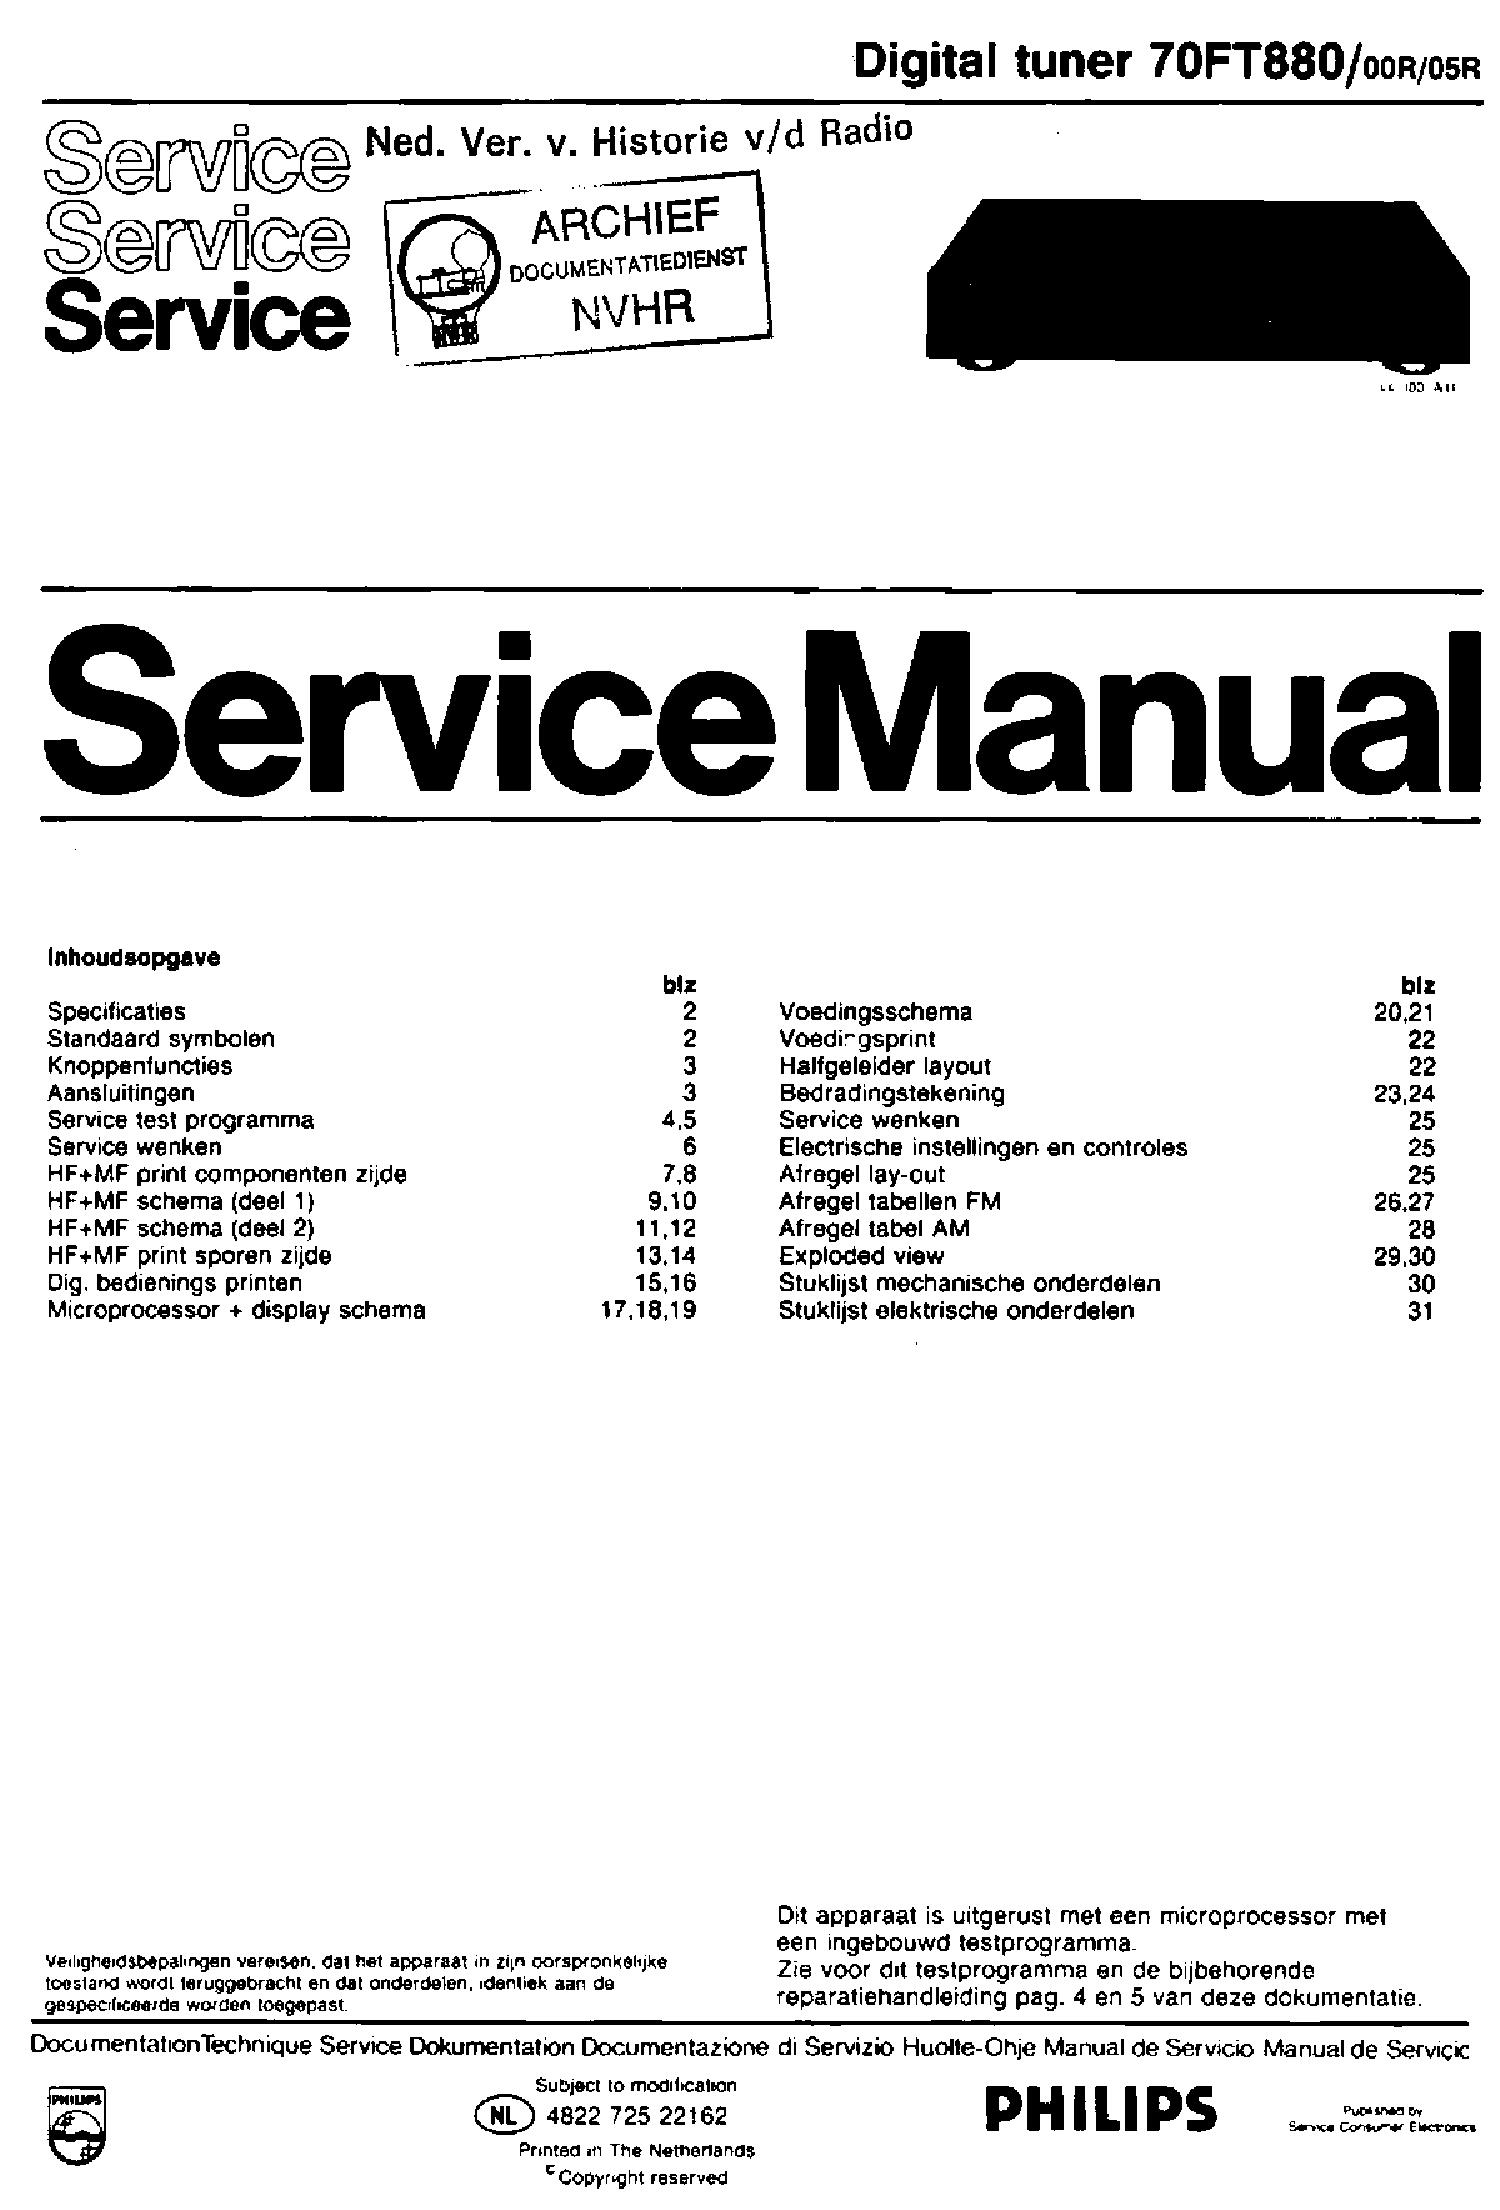 PHILIPS 70FT880-00R-05R DIGITAL TUNER SM service manual (1st page)